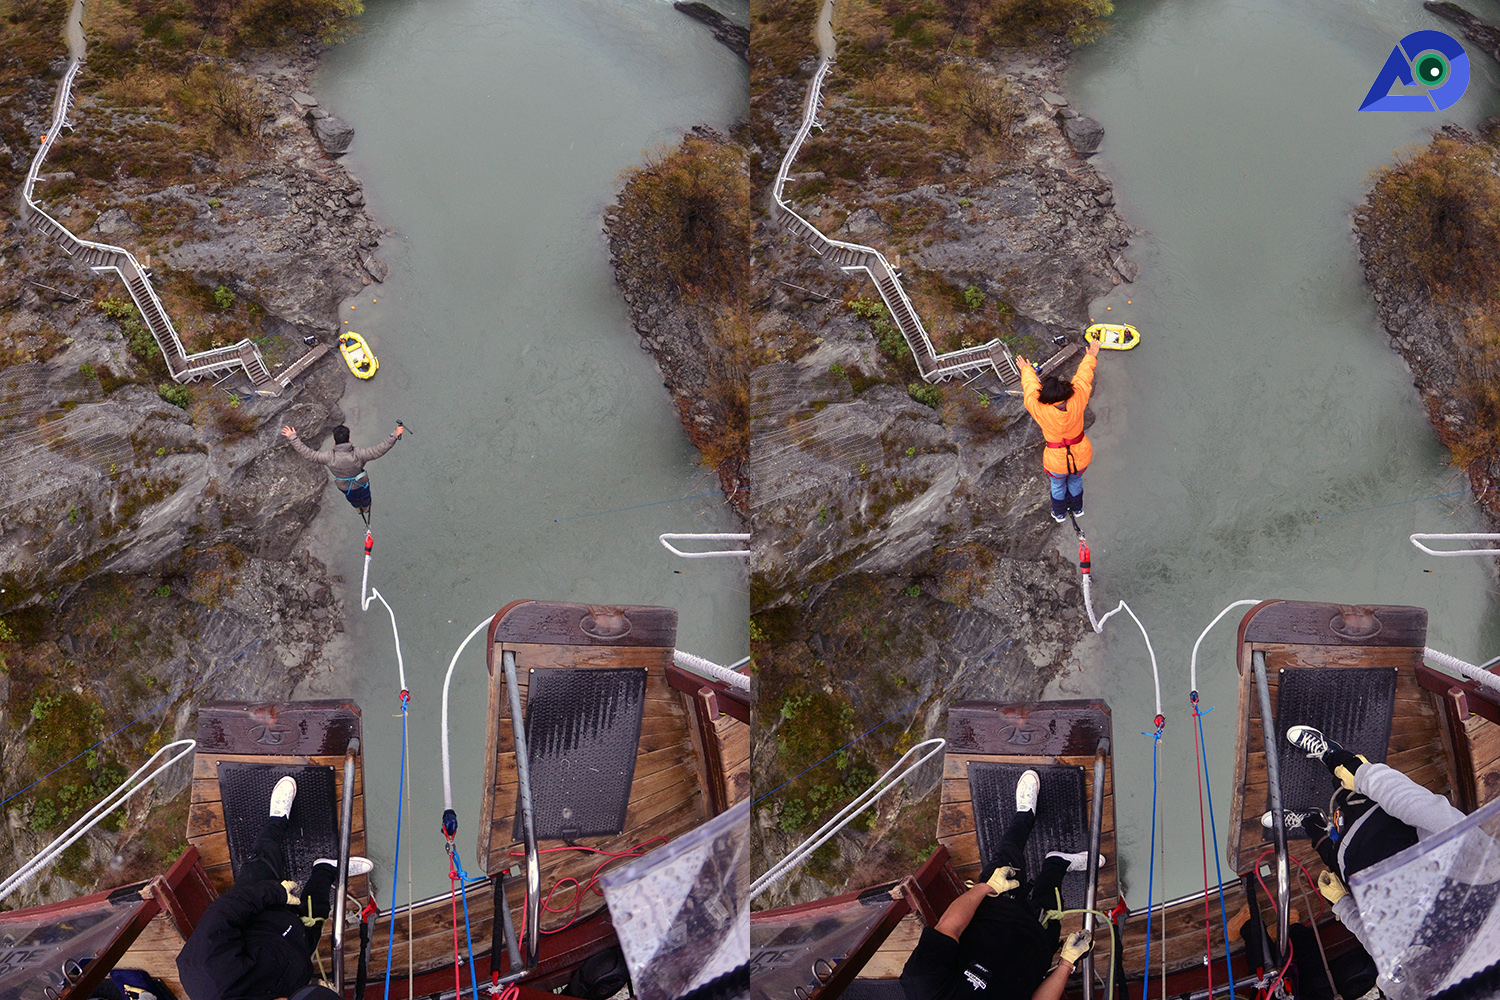 Kawarau Bridge Bungy - We Jumped From The Home Of Bungy Jumping